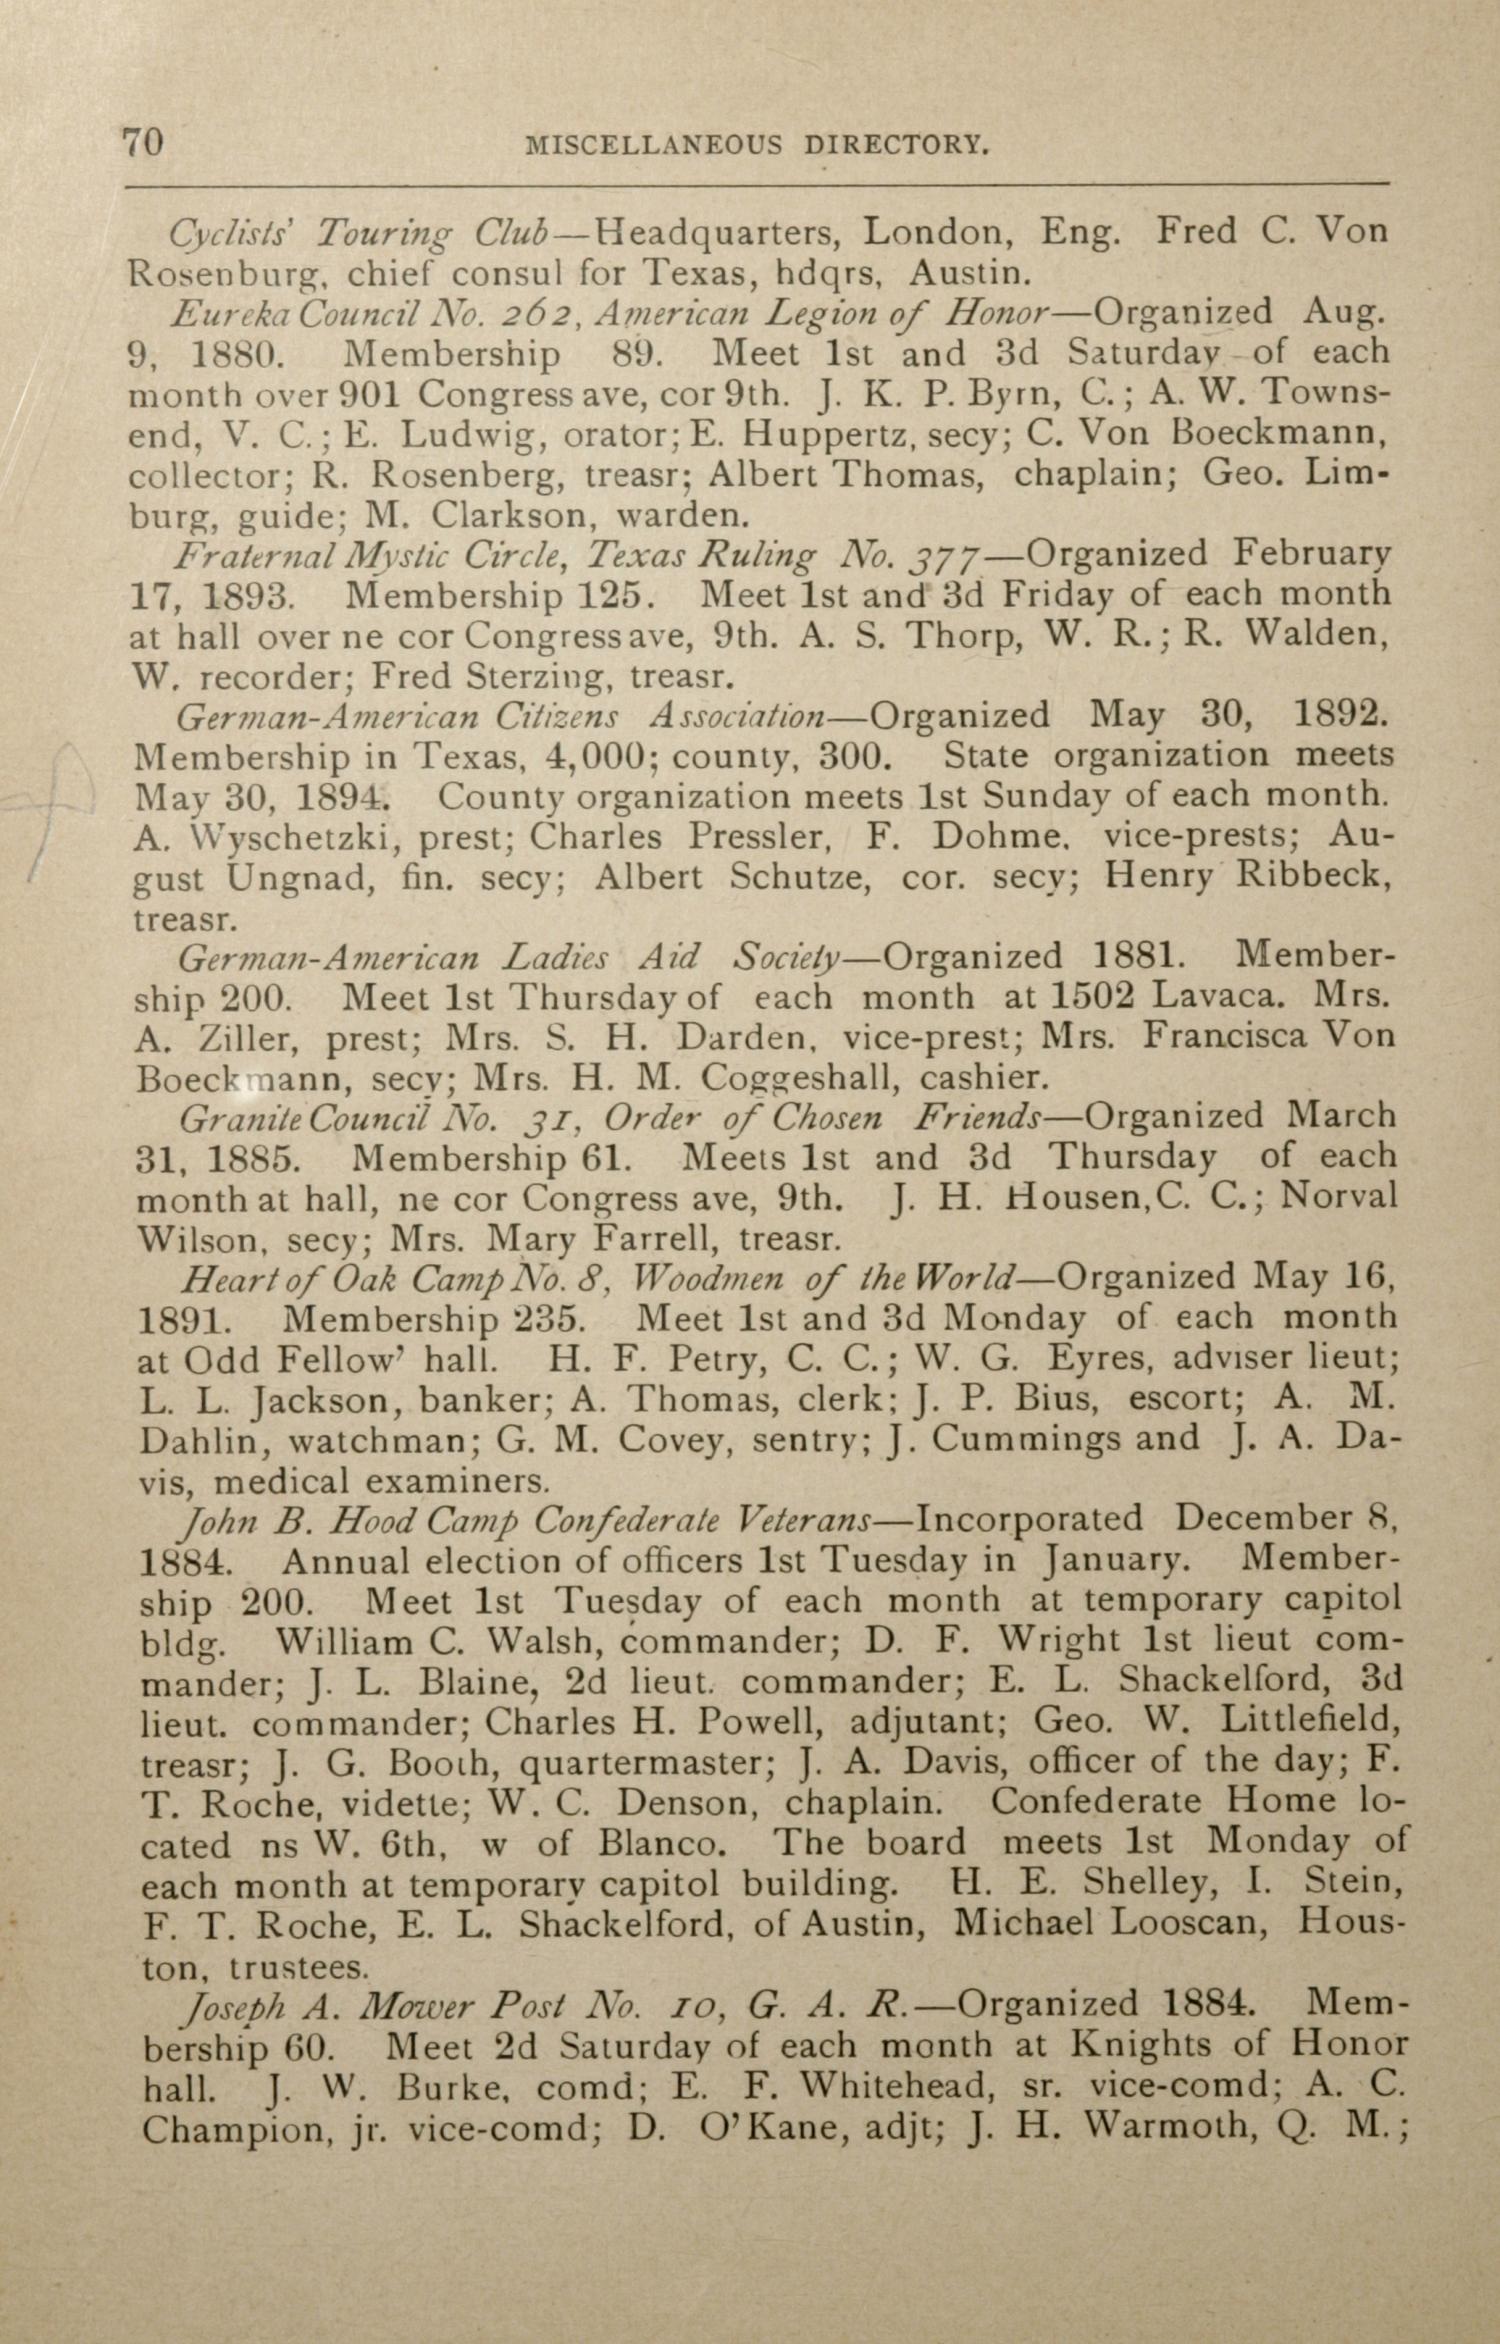 Morrison & Fourmy's General Directory of the City of Austin, 1893-94
                                                
                                                    70
                                                